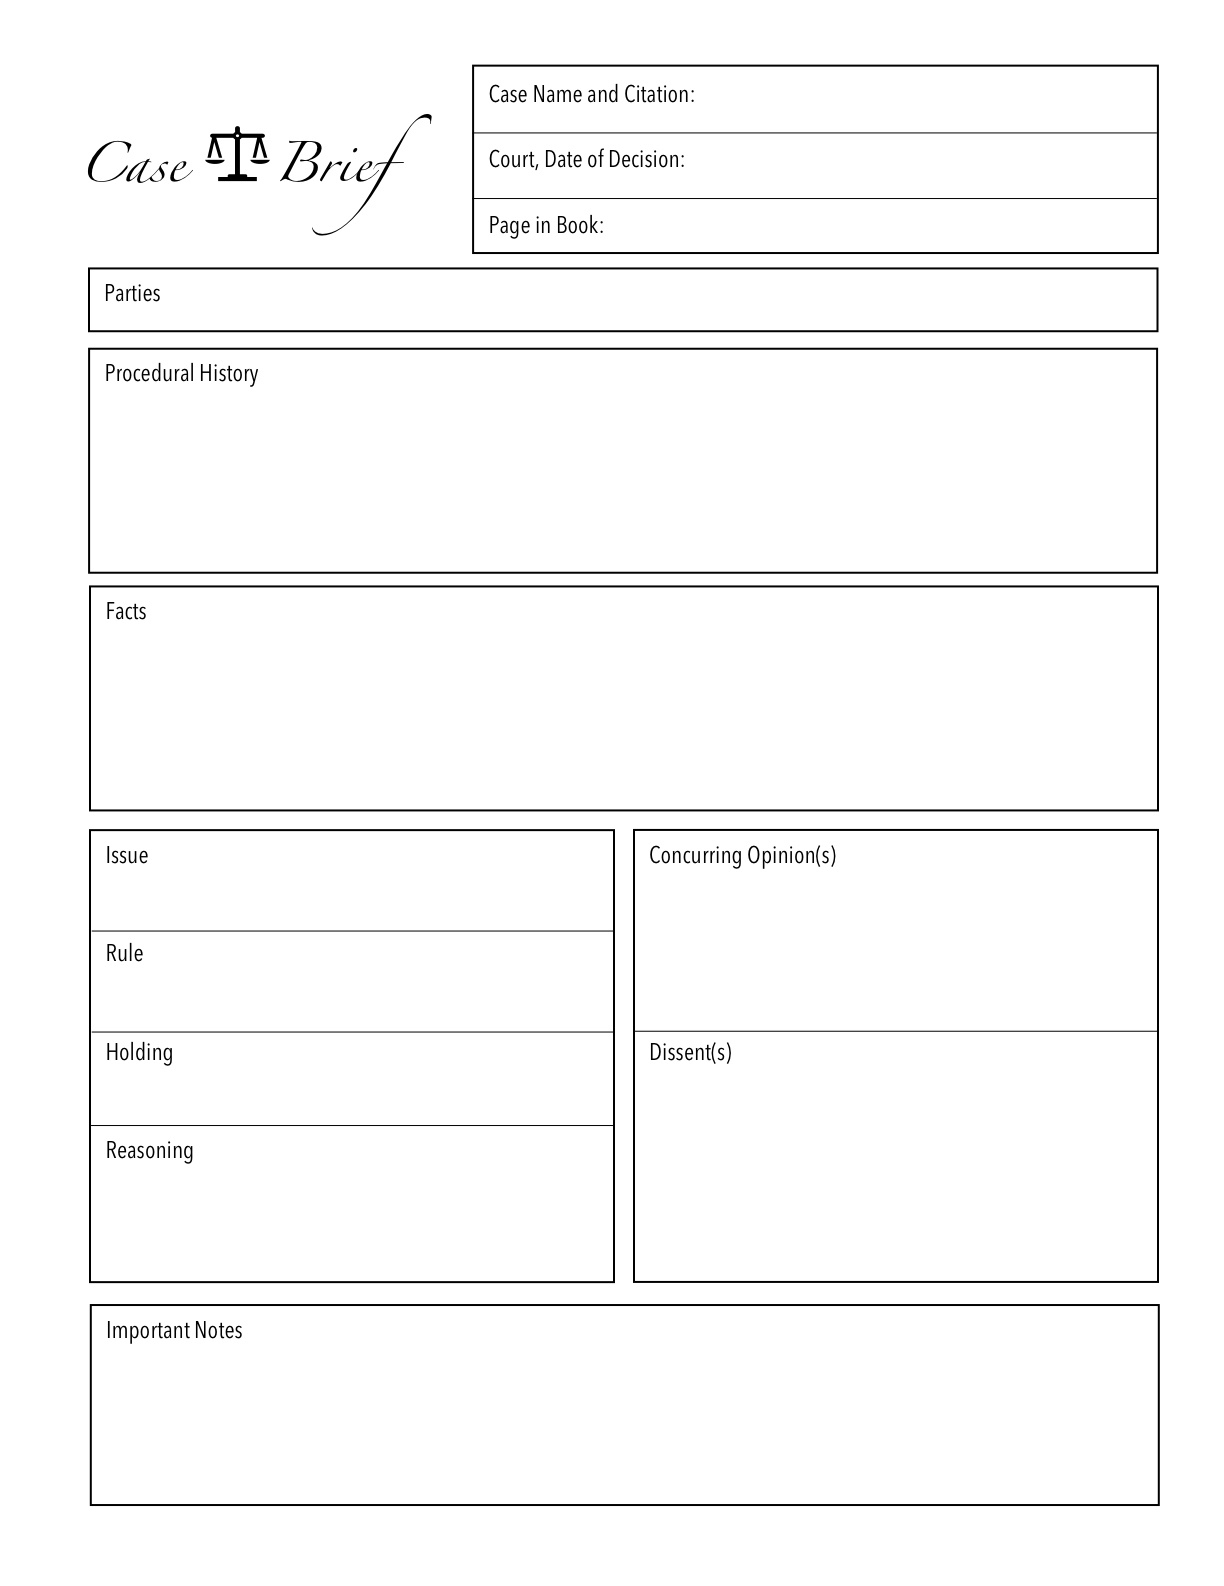 Case Brief Template Notability Gallery